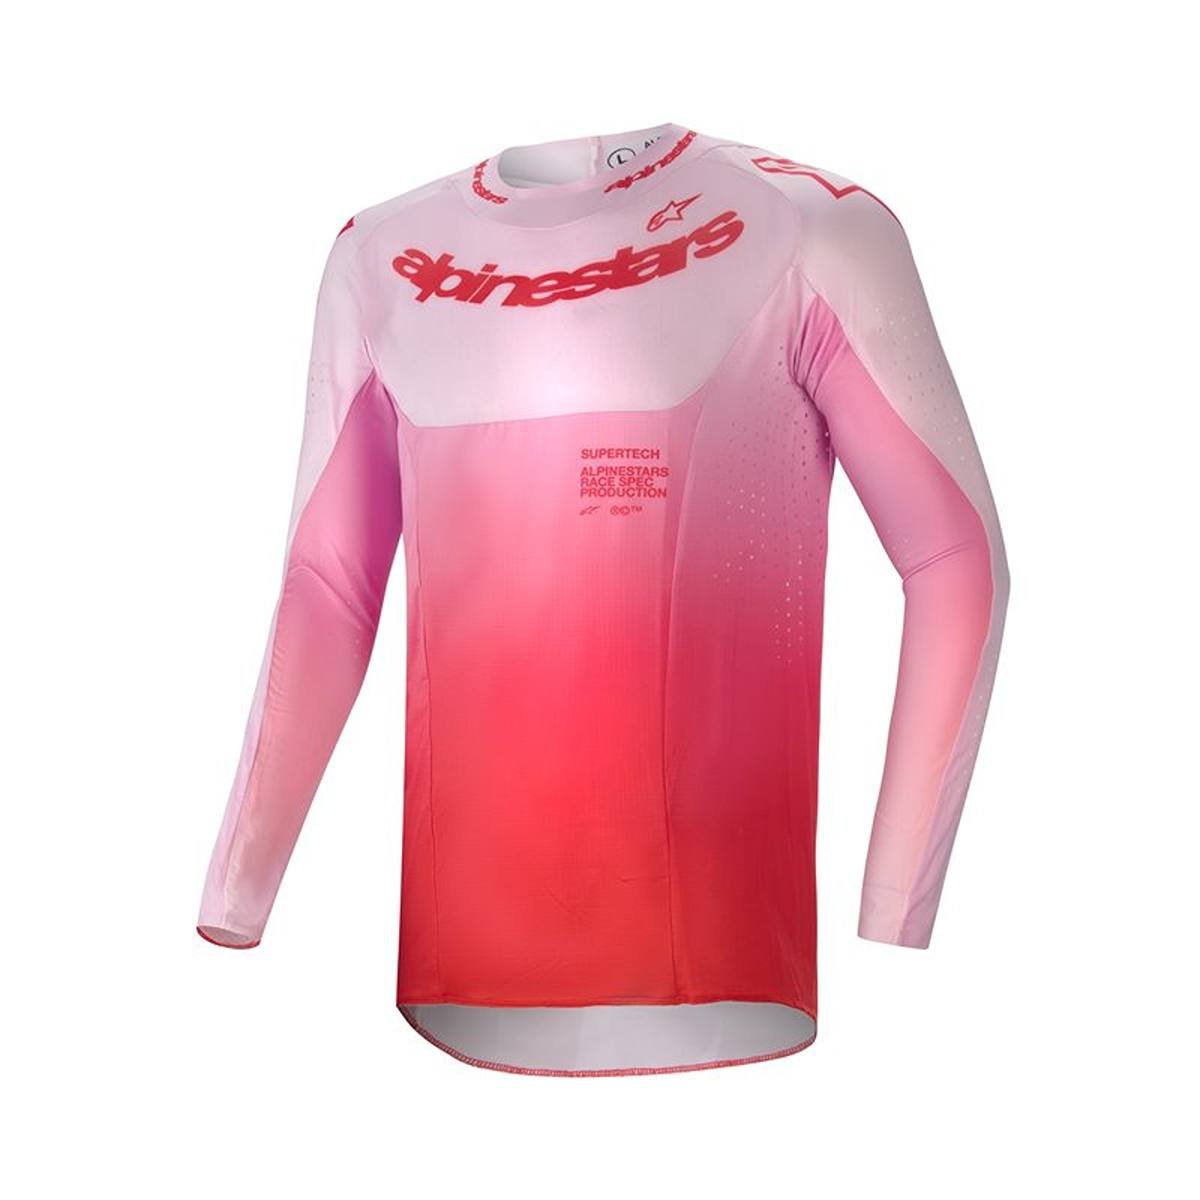 Image of Alpinestars Supertech Dade Jersey Red Berry Lilac Size XL ID 8059347268958